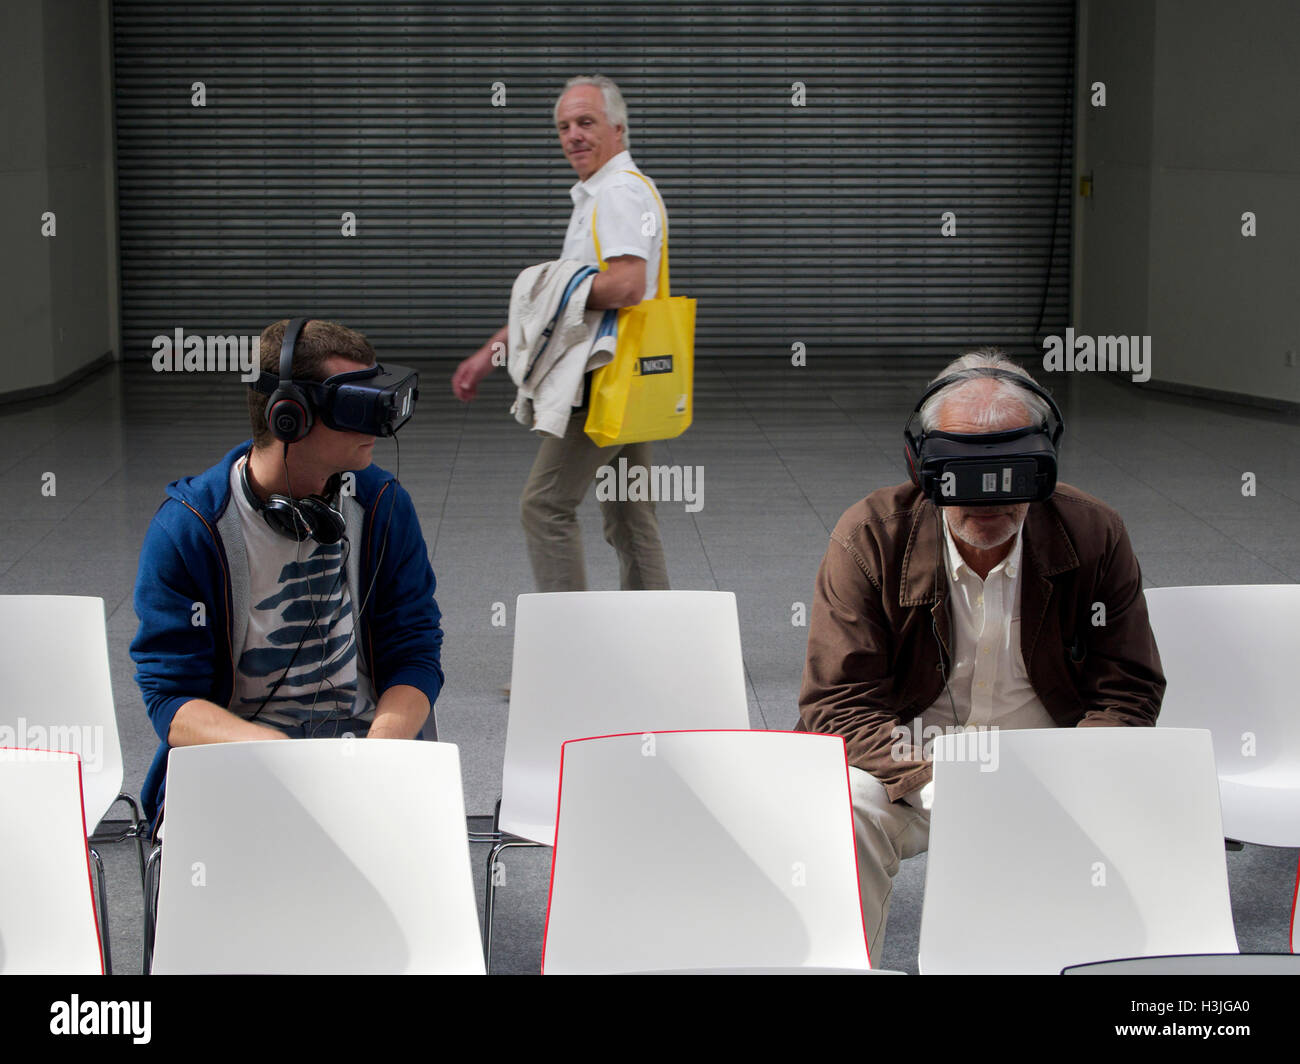 Two men wearing VR glasses in boring and sterile environment, with third man passing looking at them. Cologne, Germany Stock Photo